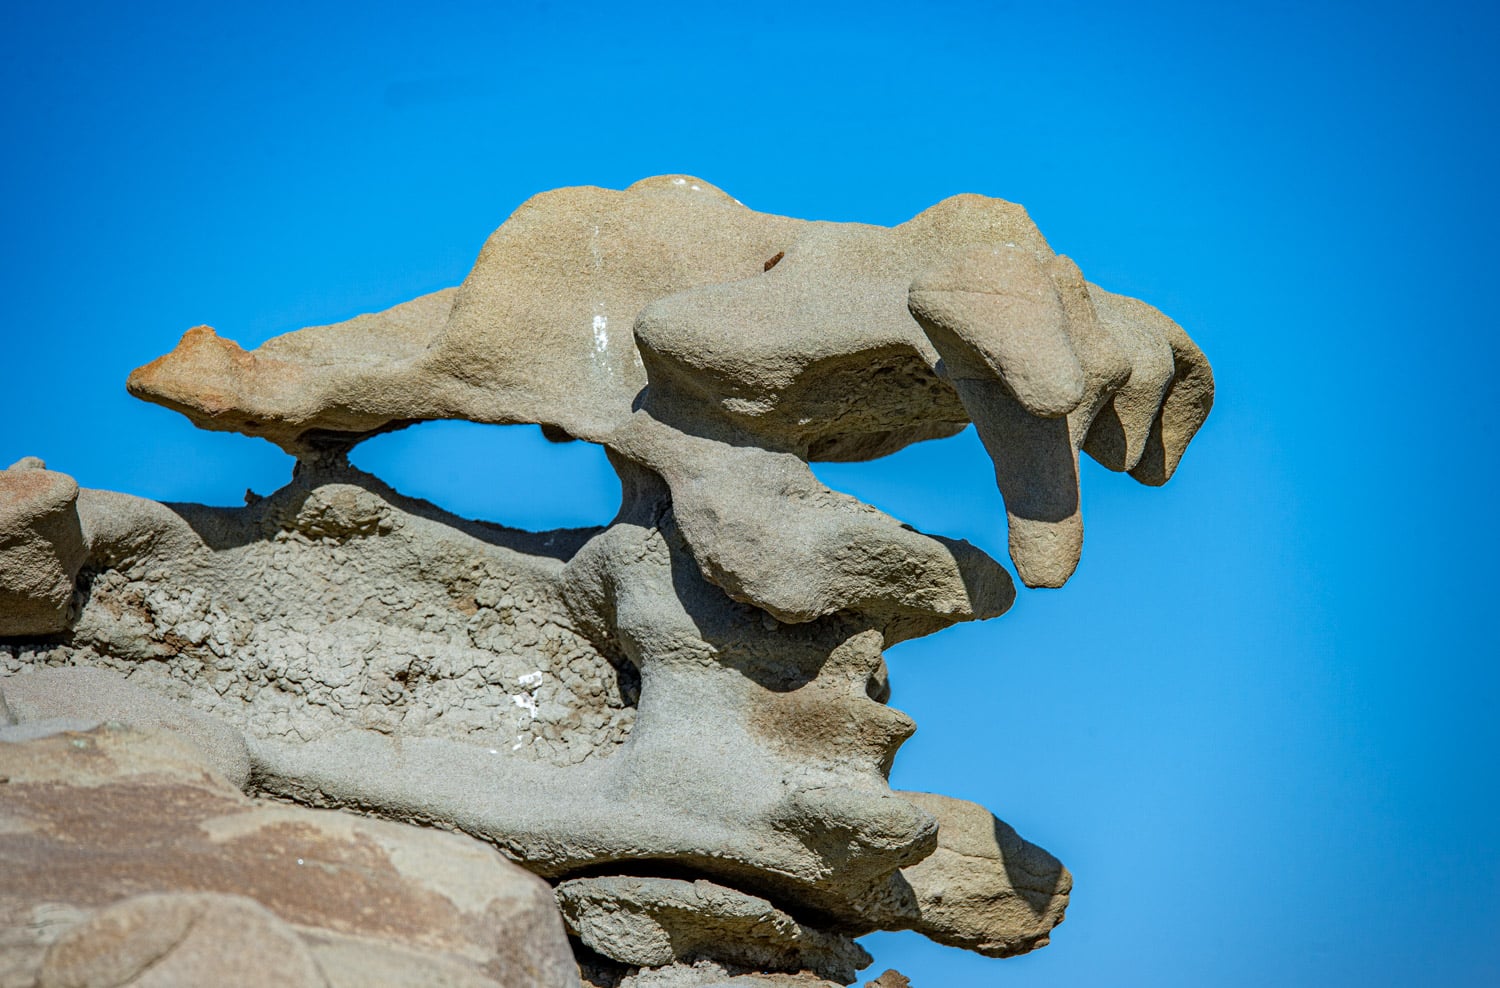 Fanciful figure naturally sculpted in the sandstone of Fantasy Canyon, south of Vernal, Utah. It looks like a panther.